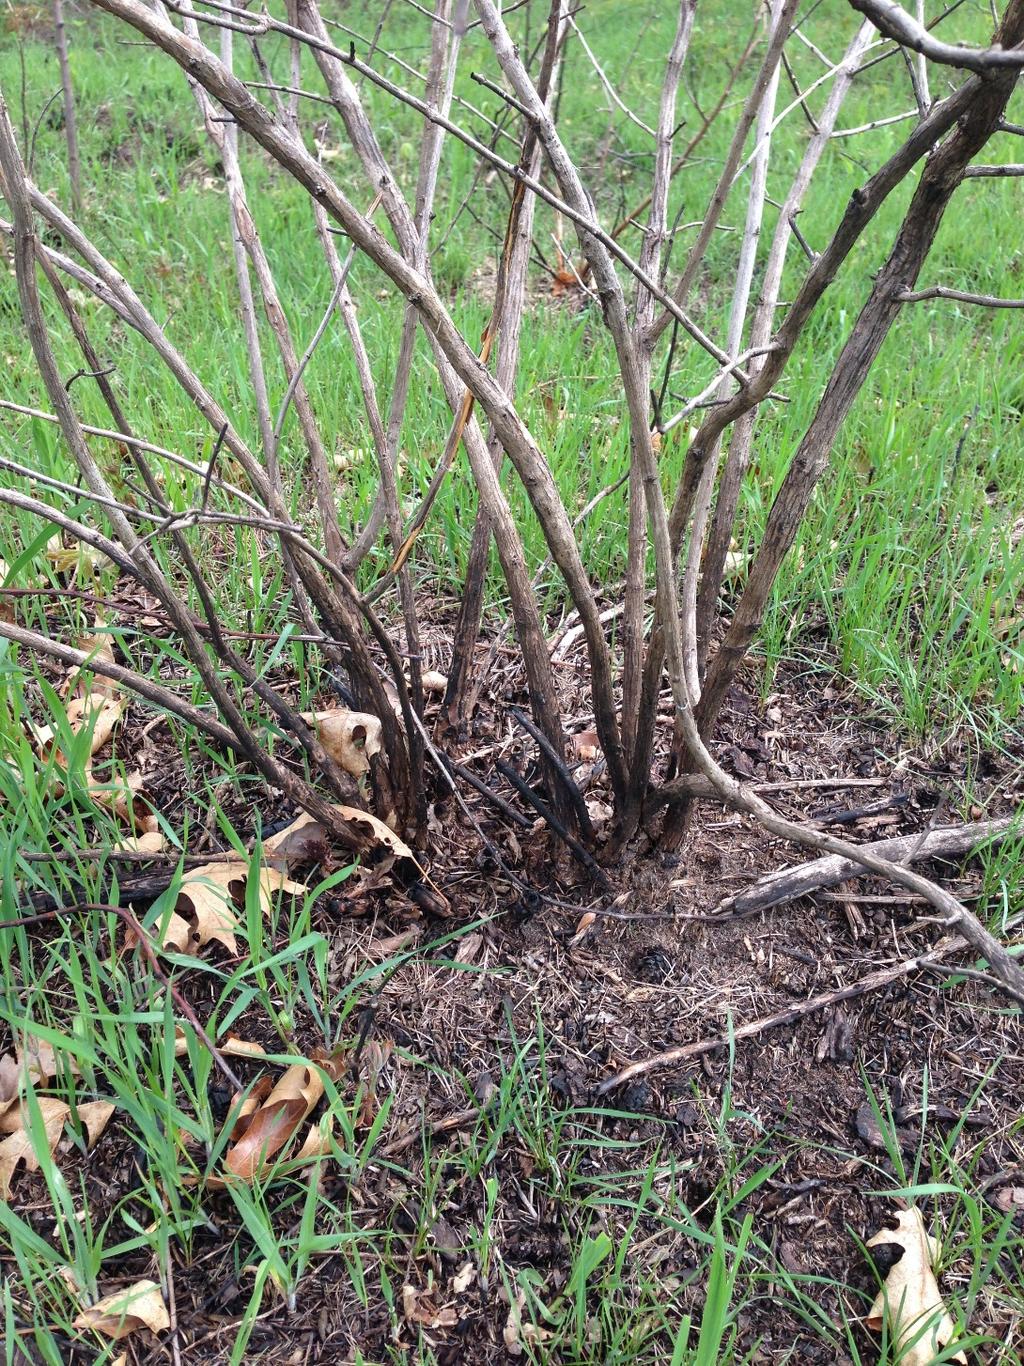 What would a lifeless honeysuckle look like? The photo below shows a plant that died from a herbicide application. Dead stems, no re-sprouts. Fire does not kill honeysuckle.